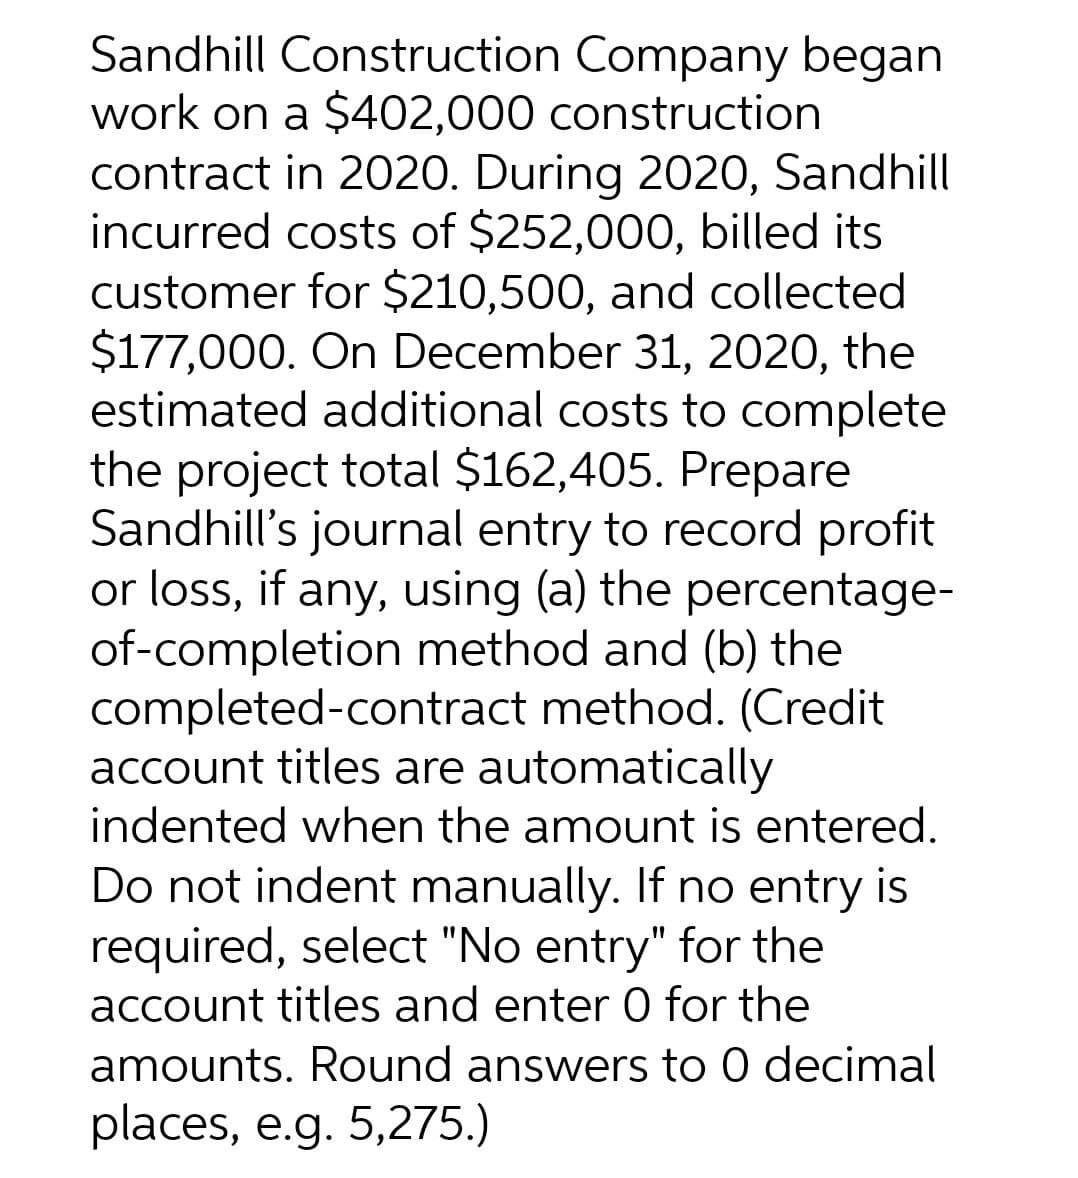 Sandhill Construction Company began
work on a $402,000 construction
contract in 2020. During 2020, Sandhill
incurred costs of $252,000, billed its
customer for $210,500, and collected
$177,000. On December 31, 2020, the
estimated additional costs to complete
the project total $162,405. Prepare
Sandhill's journal entry to record profit
or loss, if any, using (a) the percentage-
of-completion method and (b) the
completed-contract method. (Credit
account titles are automatically
indented when the amount is entered.
Do not indent manually. If no entry is
required, select "No entry" for the
account titles and enter 0 for the
amounts. Round answers to 0 decimal
places, e.g. 5,275.)
